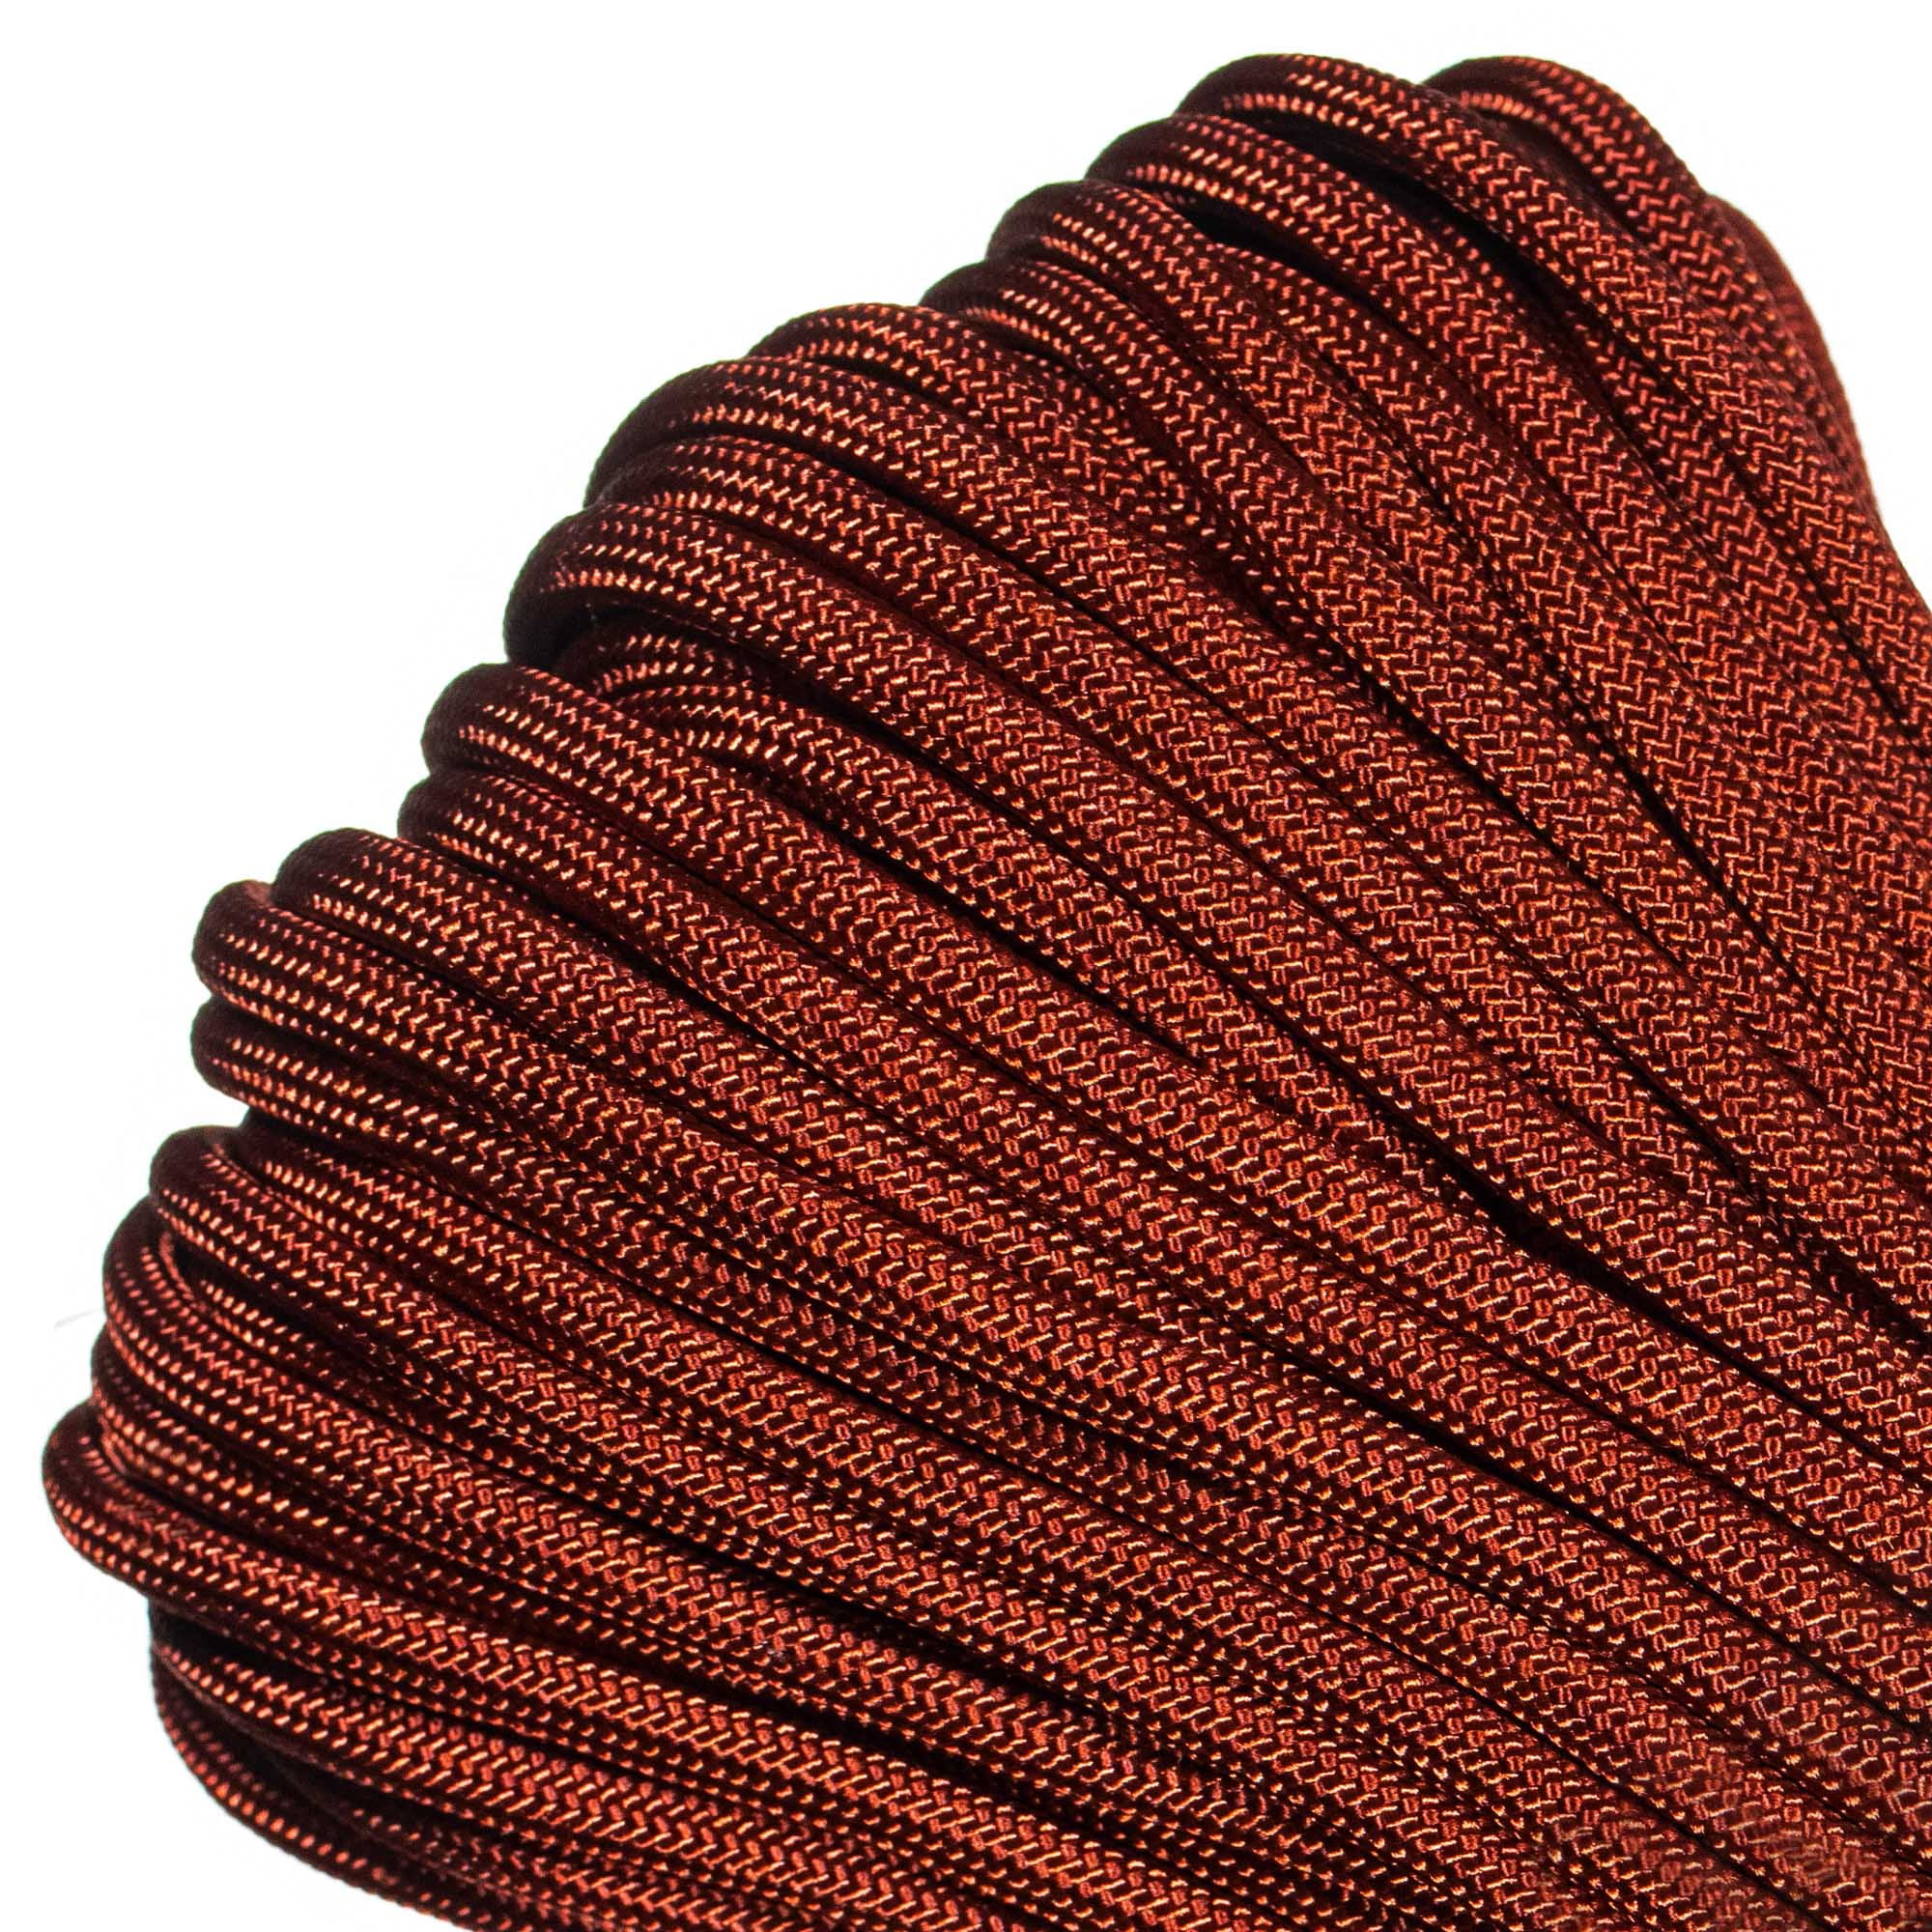 Paracord Planet Brand 550 lb Type III Commercial Grade Parachute Cord -  Rust 25 Feet - USA Made 